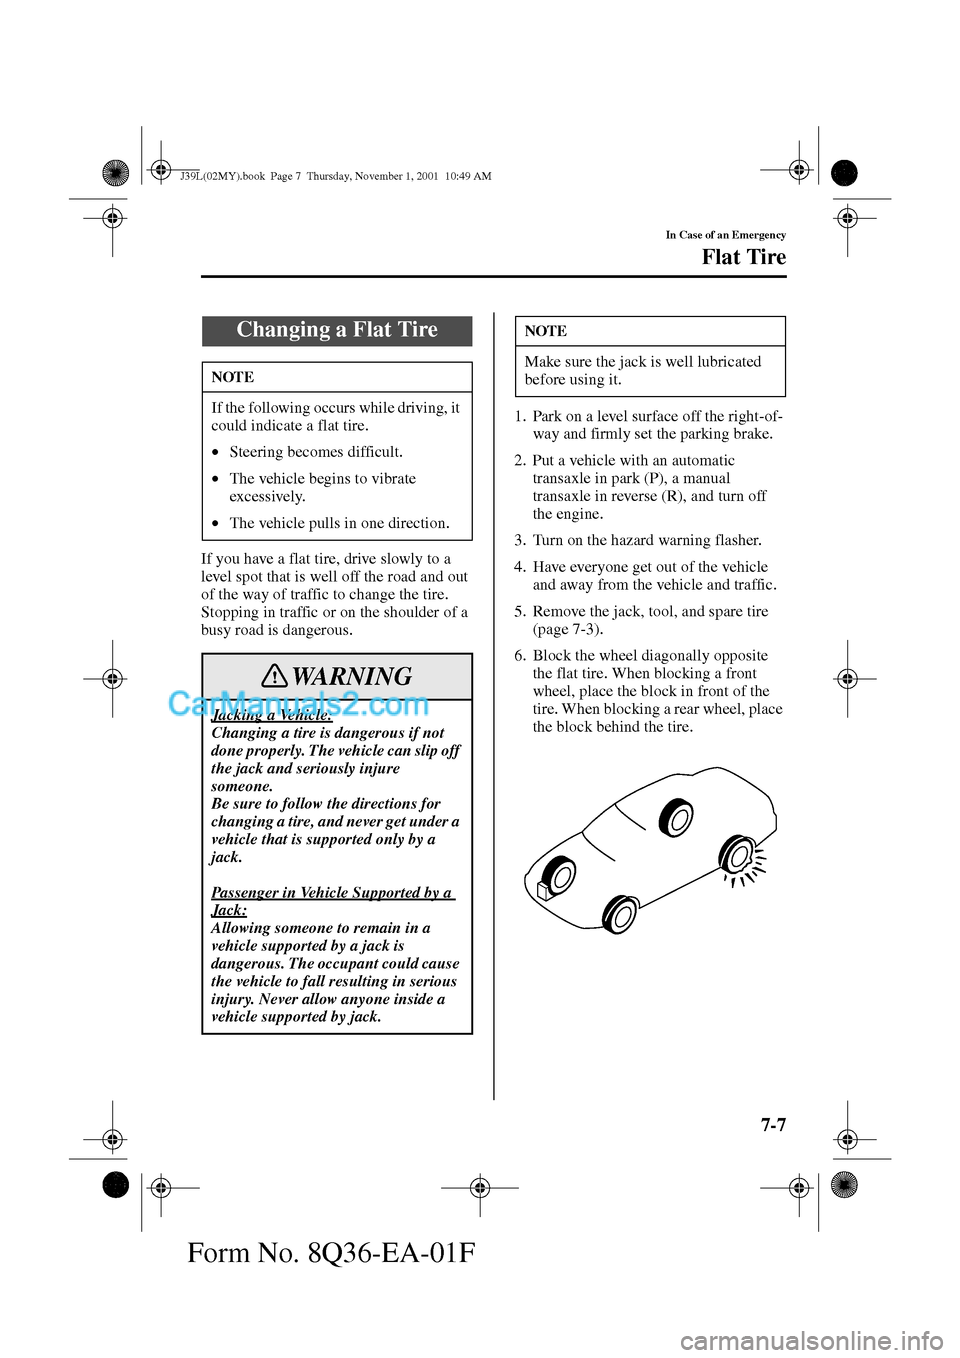 MAZDA MODEL PROTÉGÉ 2002  Owners Manual (in English) 7-7
In Case of an Emergency
Flat Tire
Form No. 8Q36-EA-01F
If you have a flat tire, drive slowly to a 
level spot that is well off the road and out 
of the way of traffic to change the tire.
Stopping 